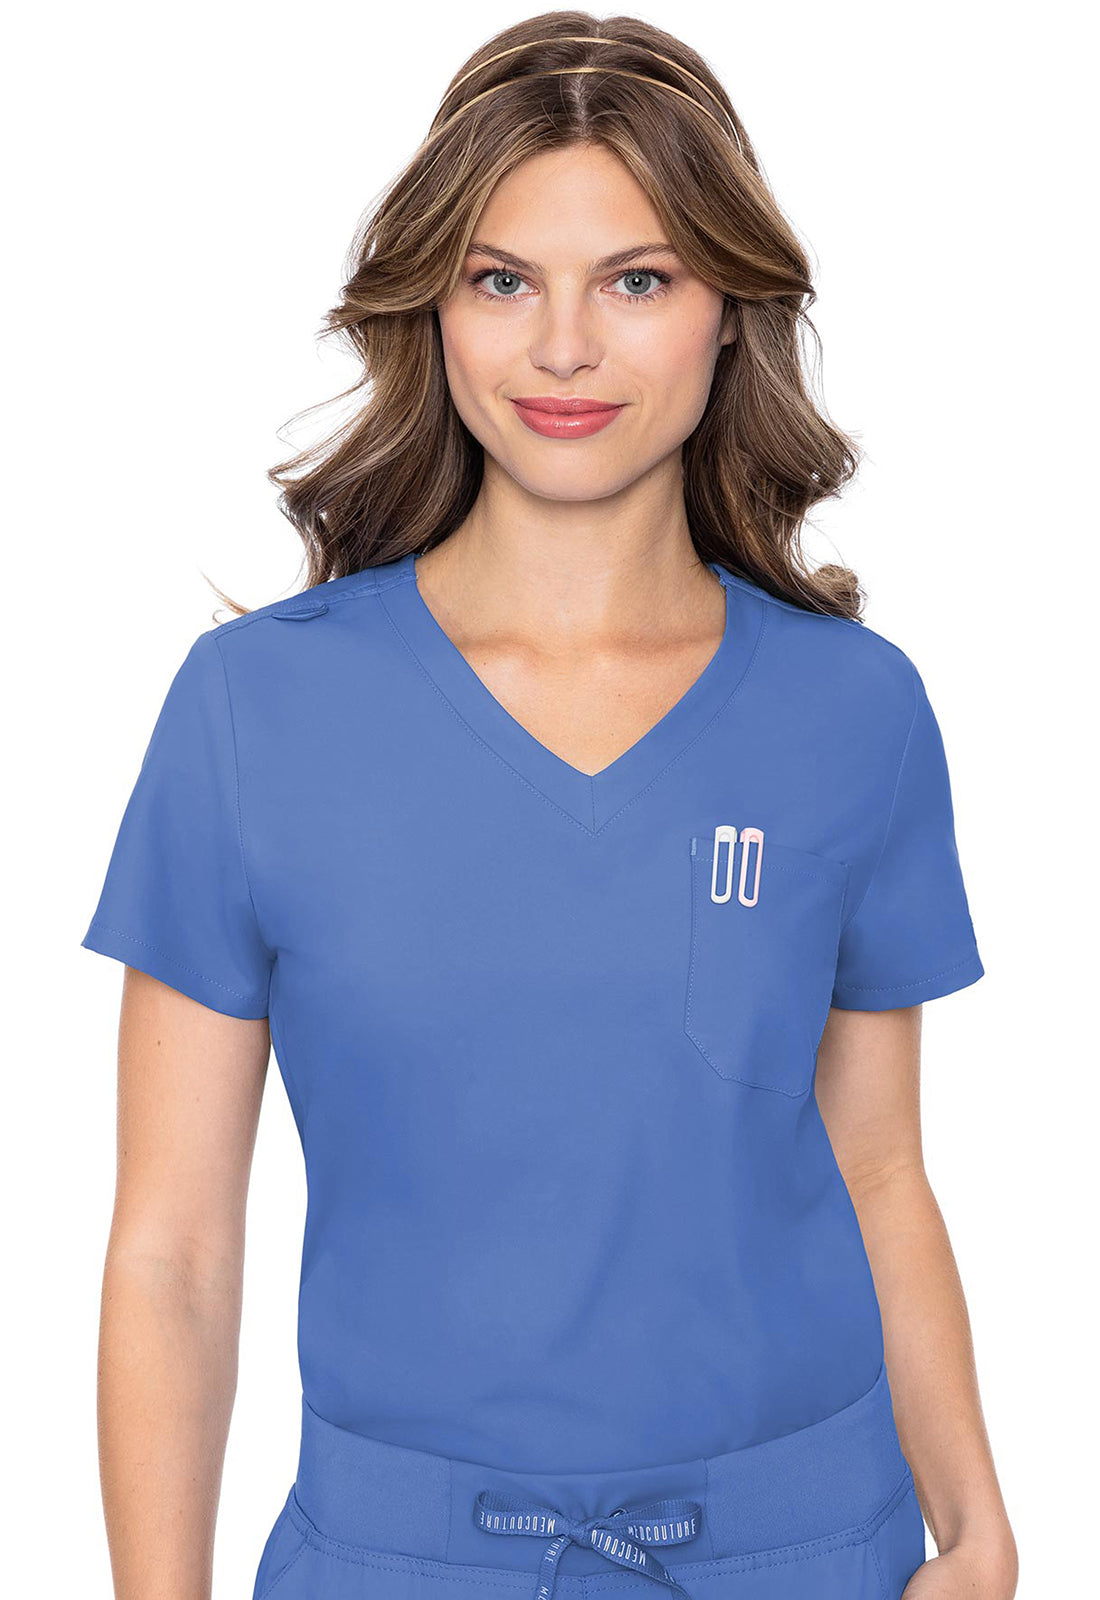 MC2432 - Med Couture Insight 1 Pocket Top